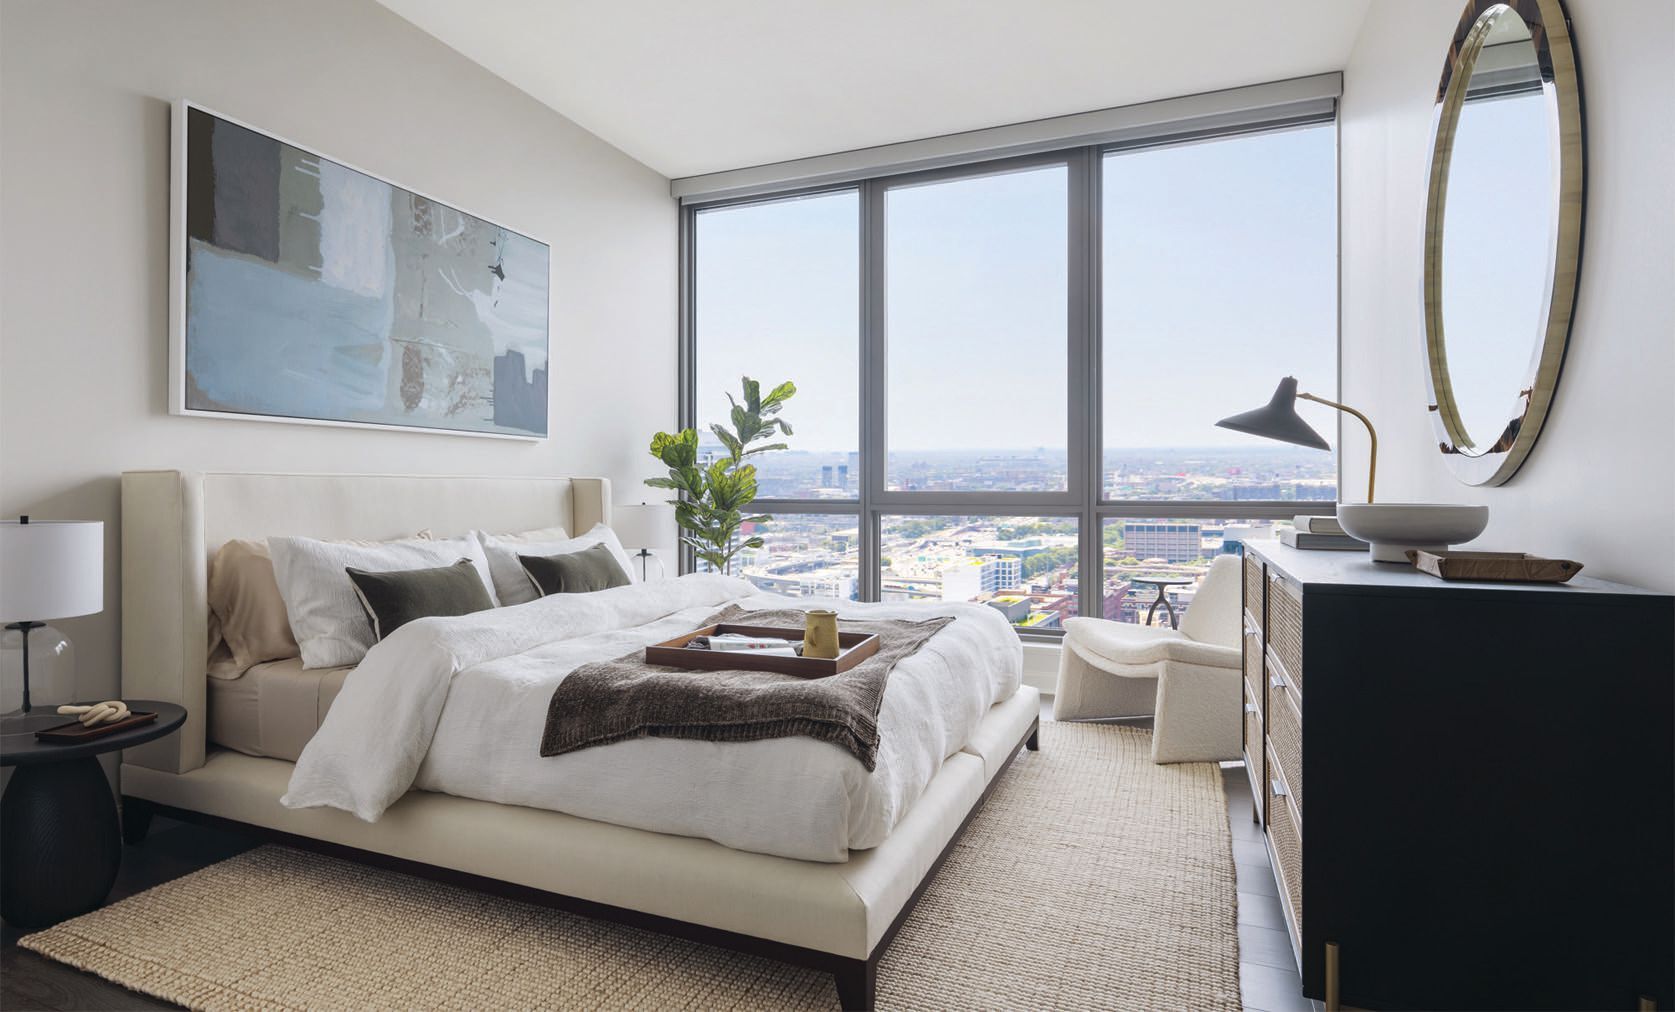 This luxe residence offers prime views from the bedroom and living area PHOTO BY SCOTT FRANCES